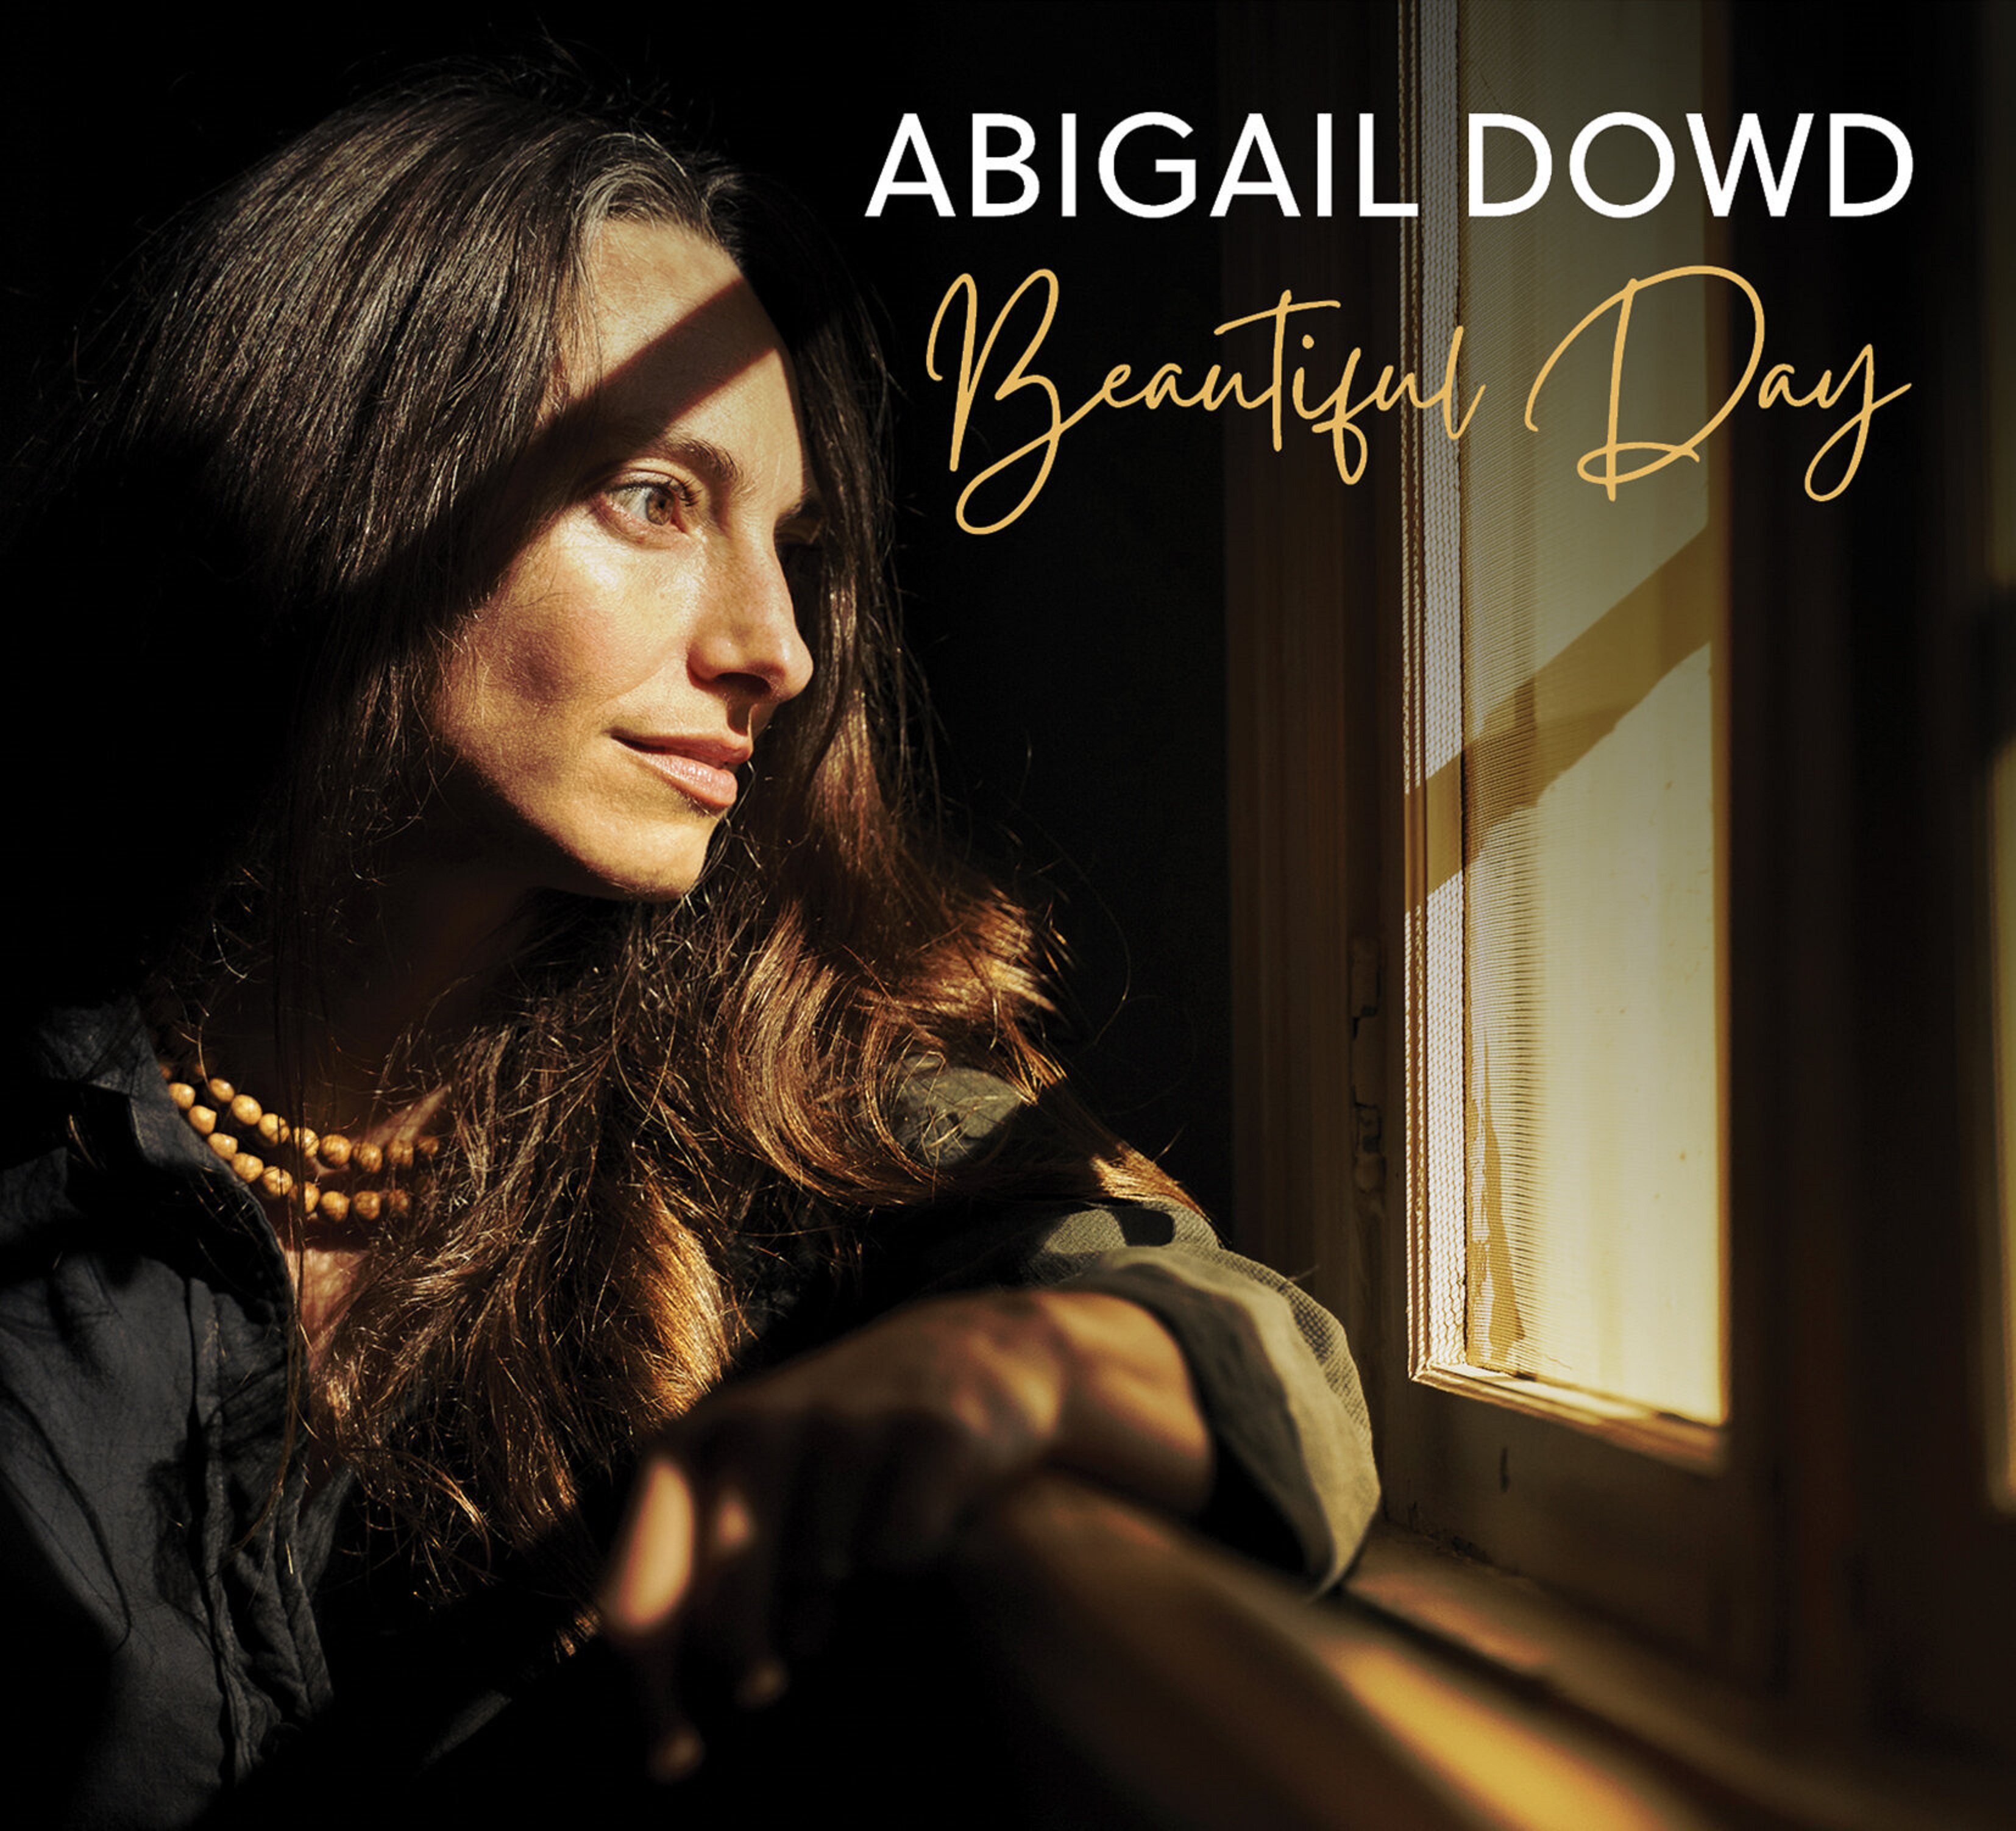 Abigail Dowd’s 'Beautiful Day' Showcases Resilience